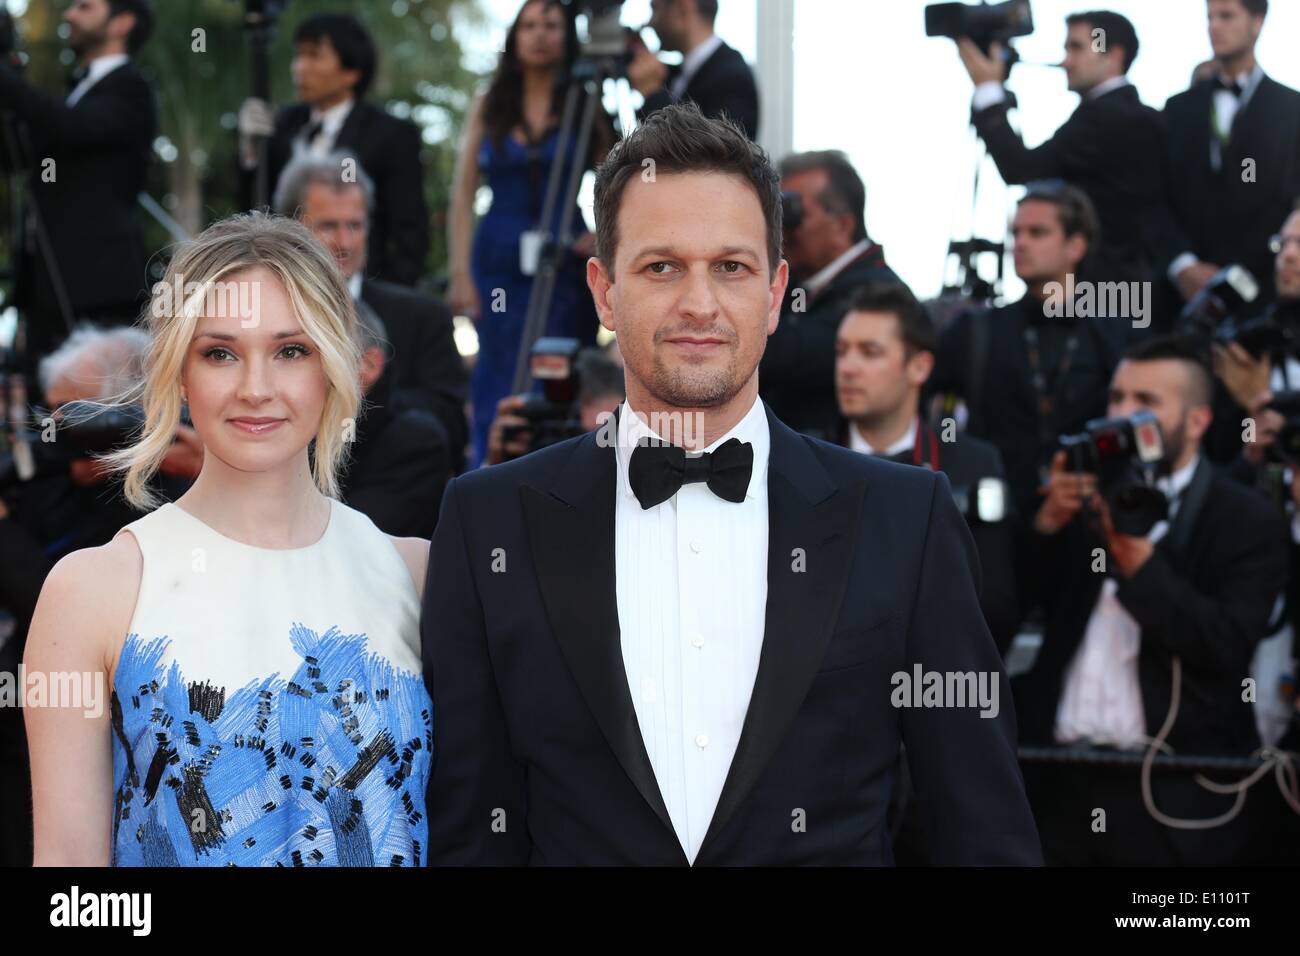 US actor Josh Charles and wife US ballet dancer Sophie Flack attend the  screening of the movie 'Deux Jours, Une Nuit' (Two Days, One Night) during  the 67th annual Cannes Film Festival,